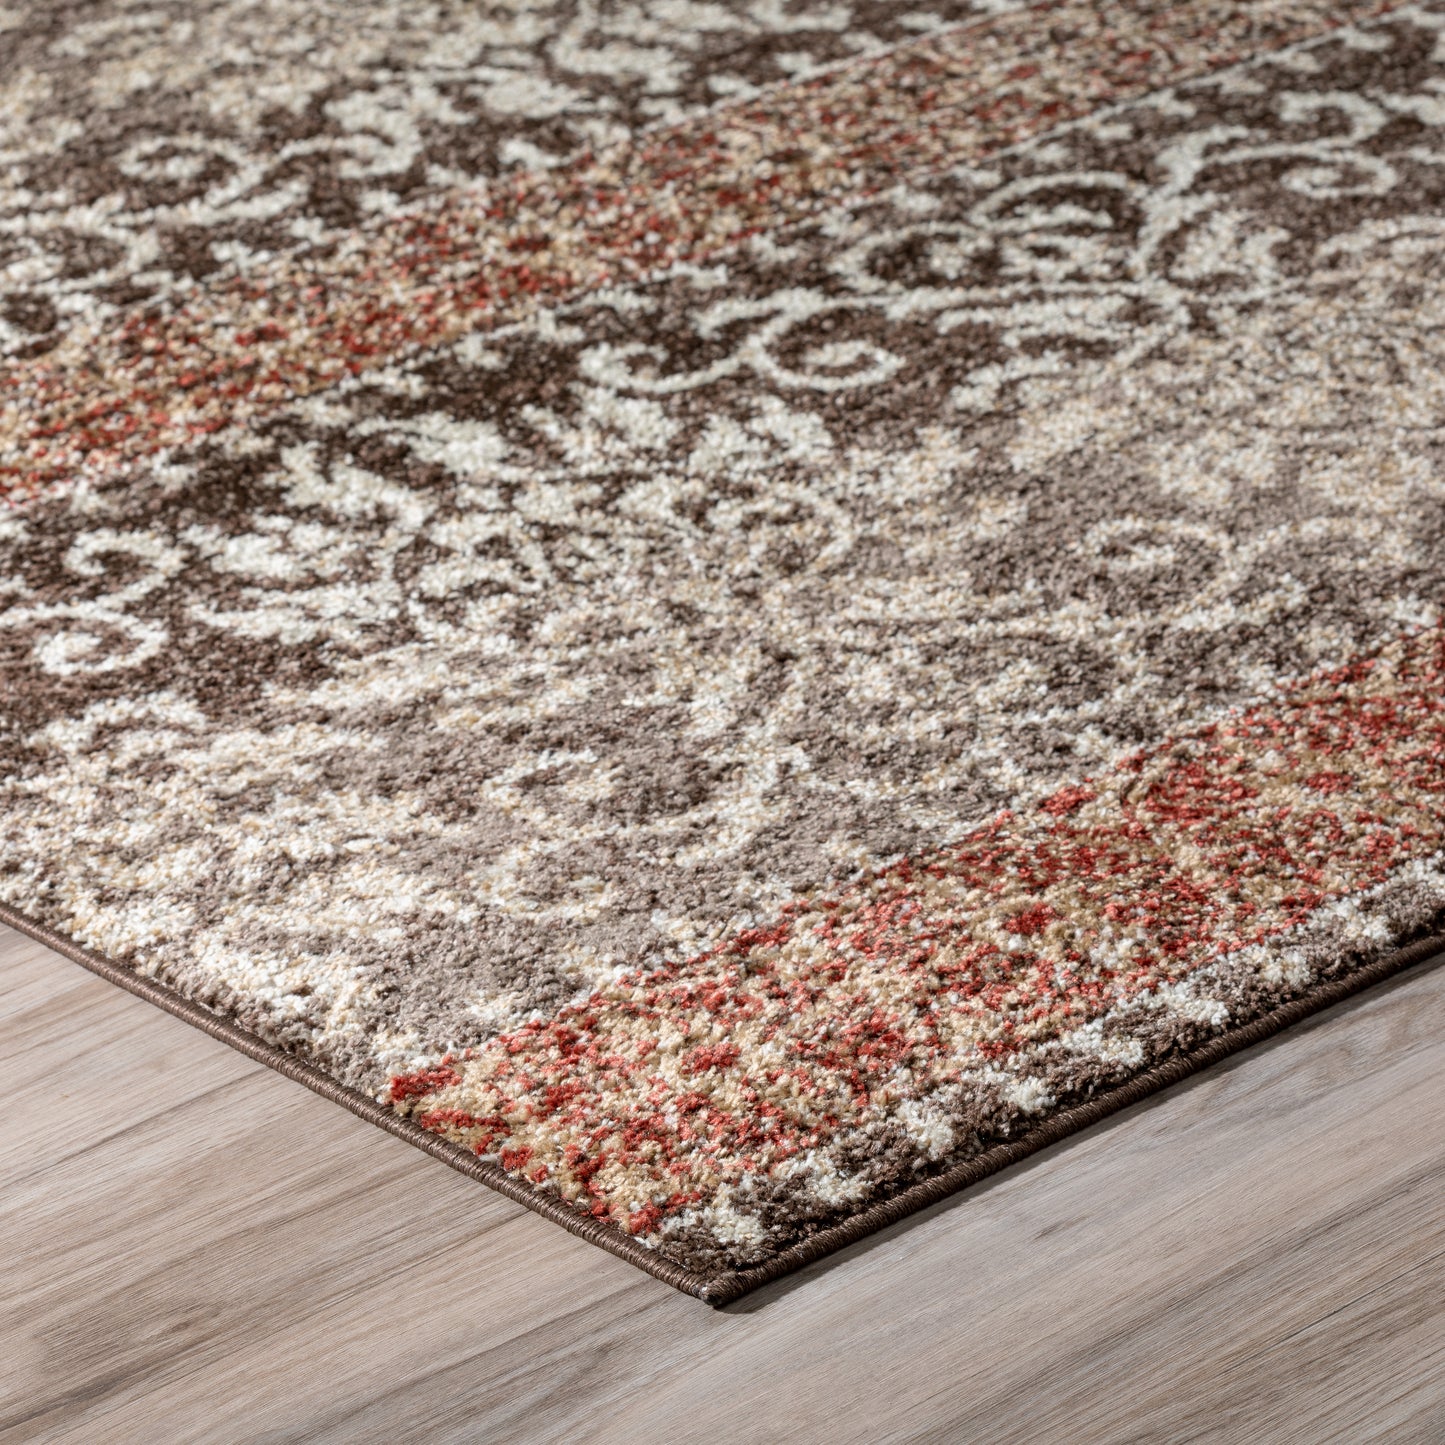 Gala GA6 Power Woven Synthetic Blend Indoor Area Rug by Dalyn Rugs